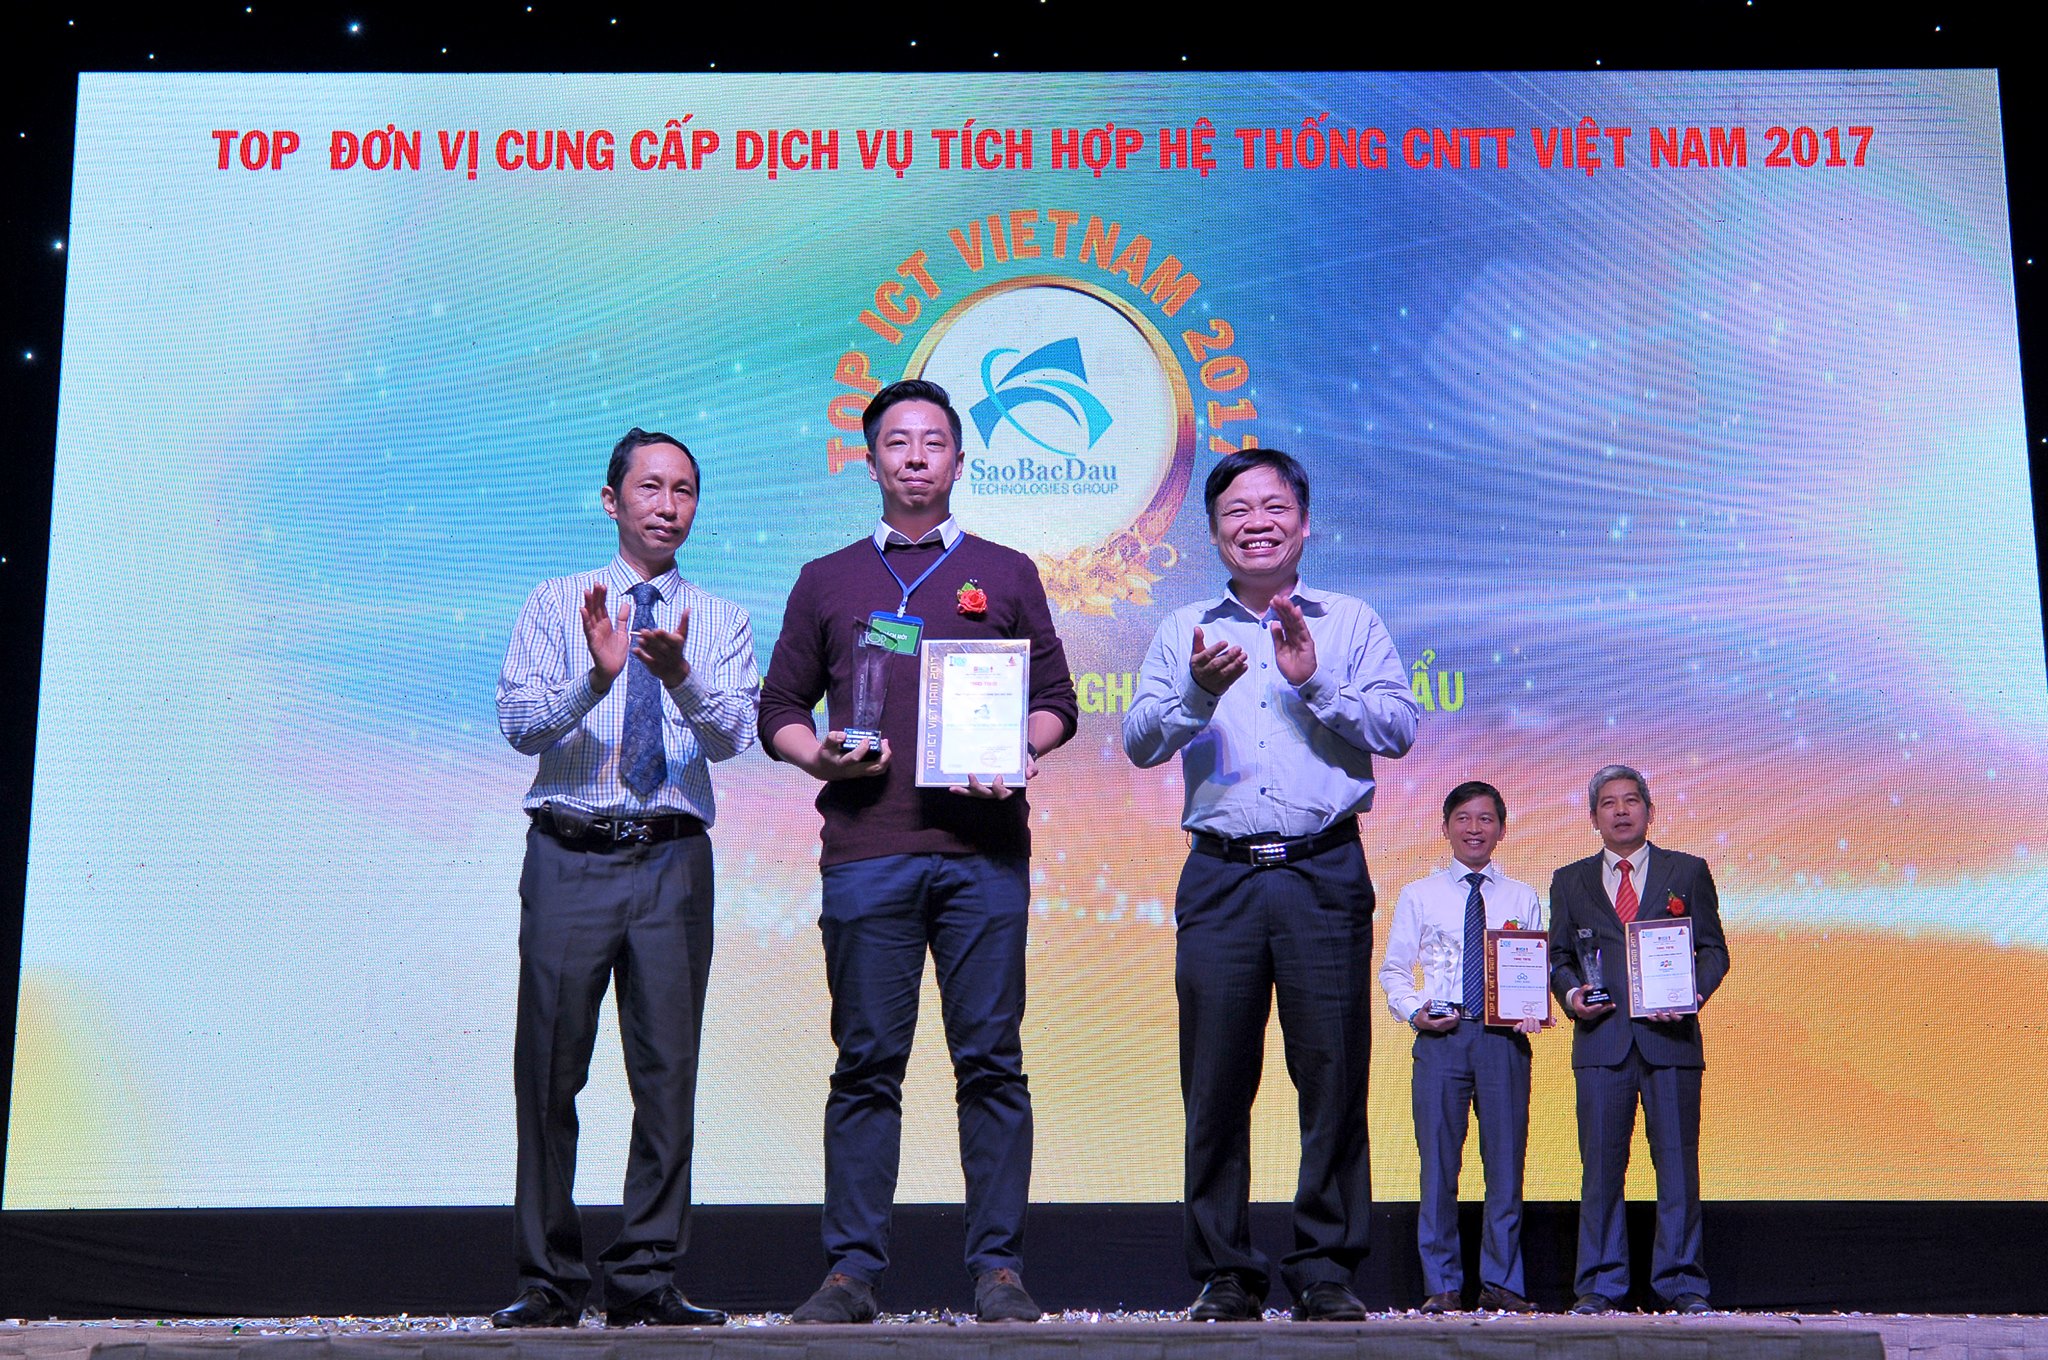 Sao Bac Dau Was Honored At Top ICT Vietnam 2017